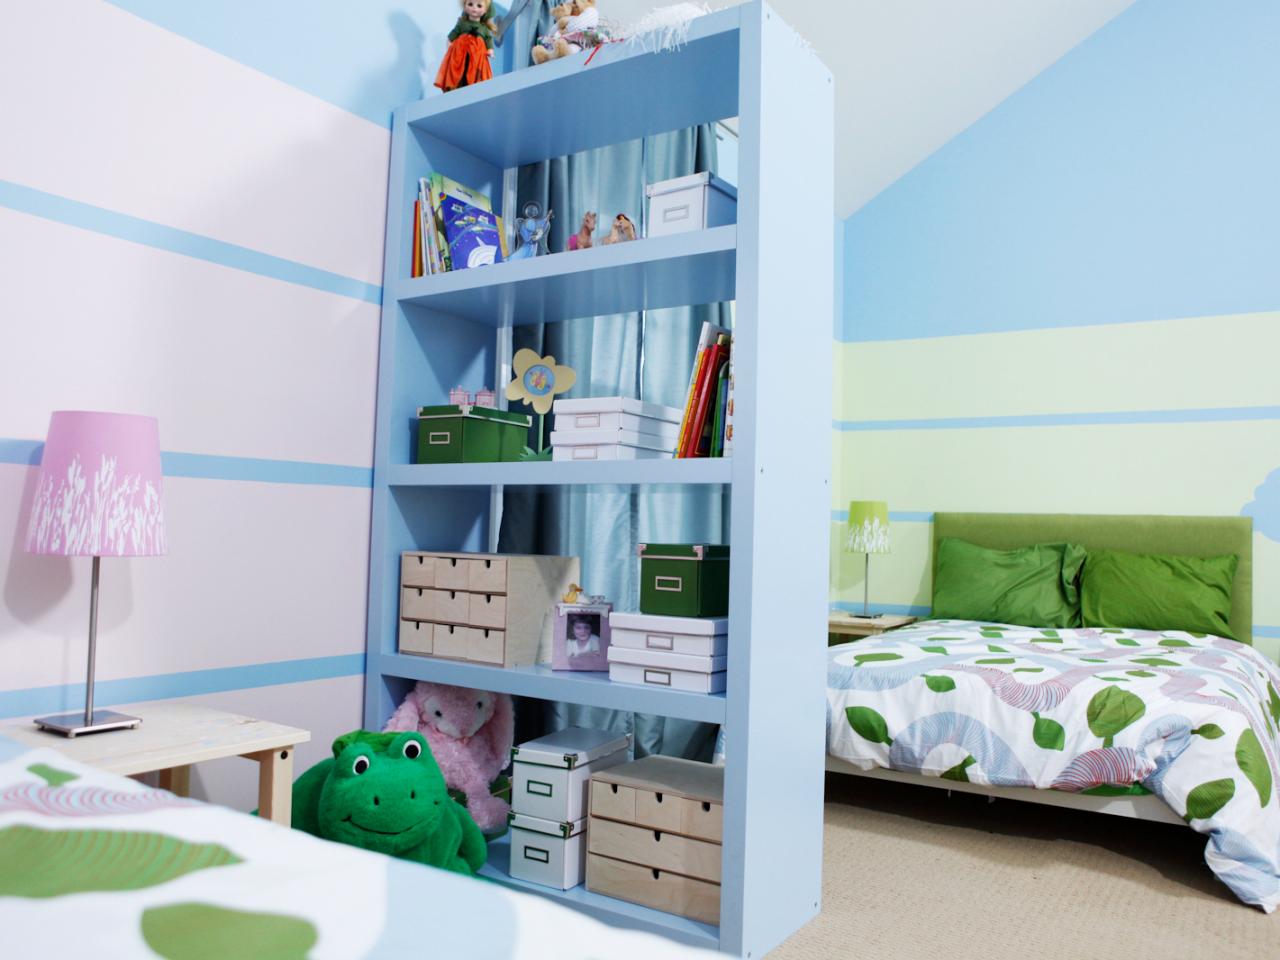 Shared Bedroom Ideas: How To Divide A Shared Kids’ Room